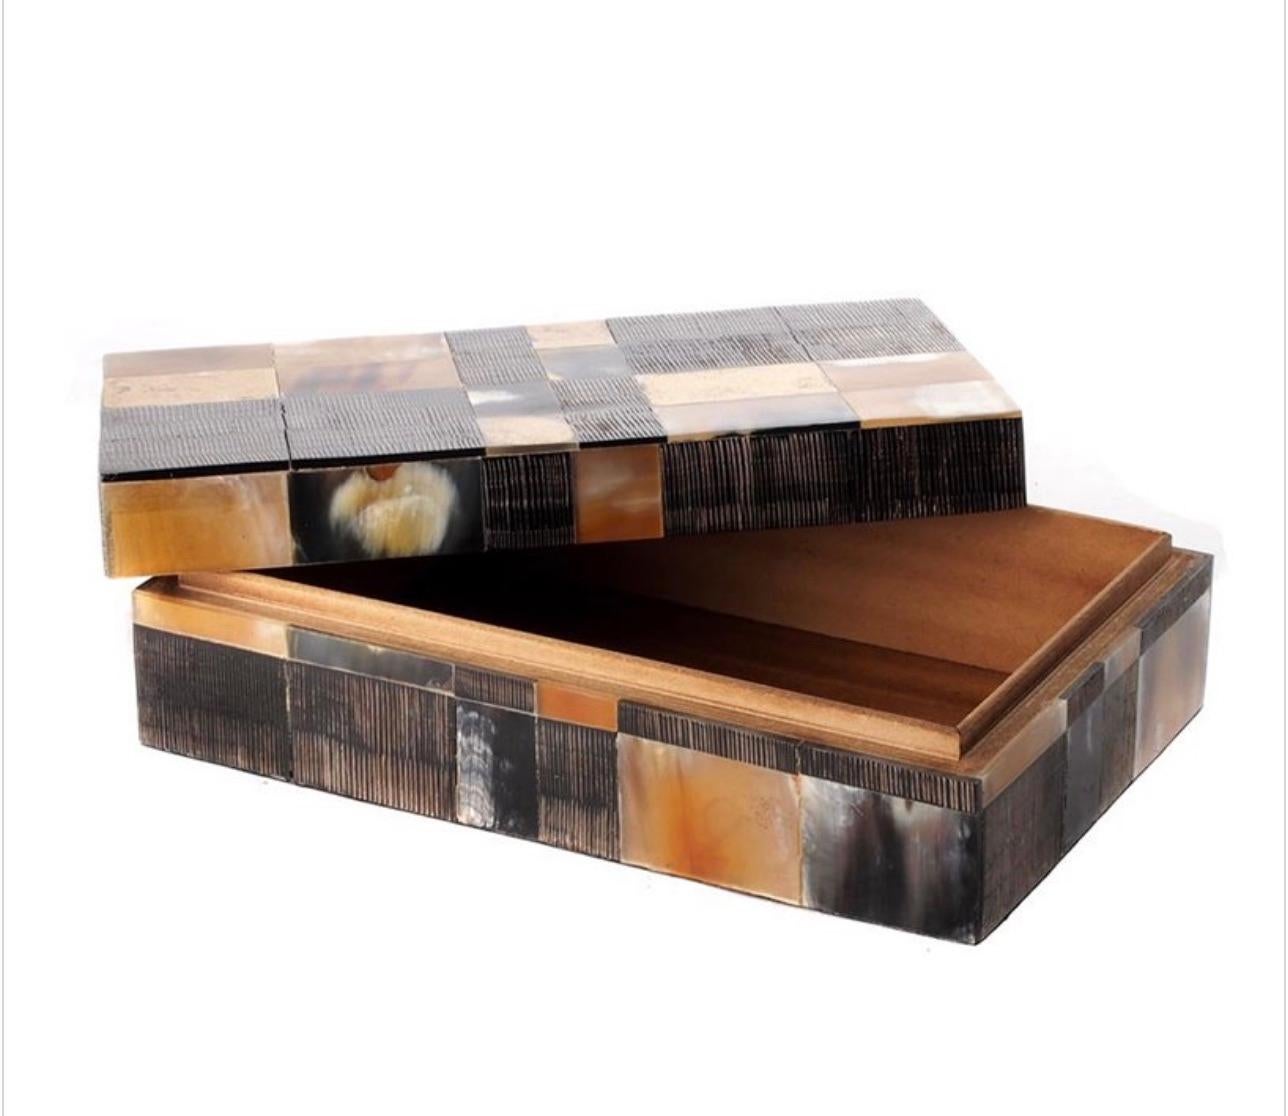 Contemporary from India patchwork of bone and horn squares decorative box with lid.
